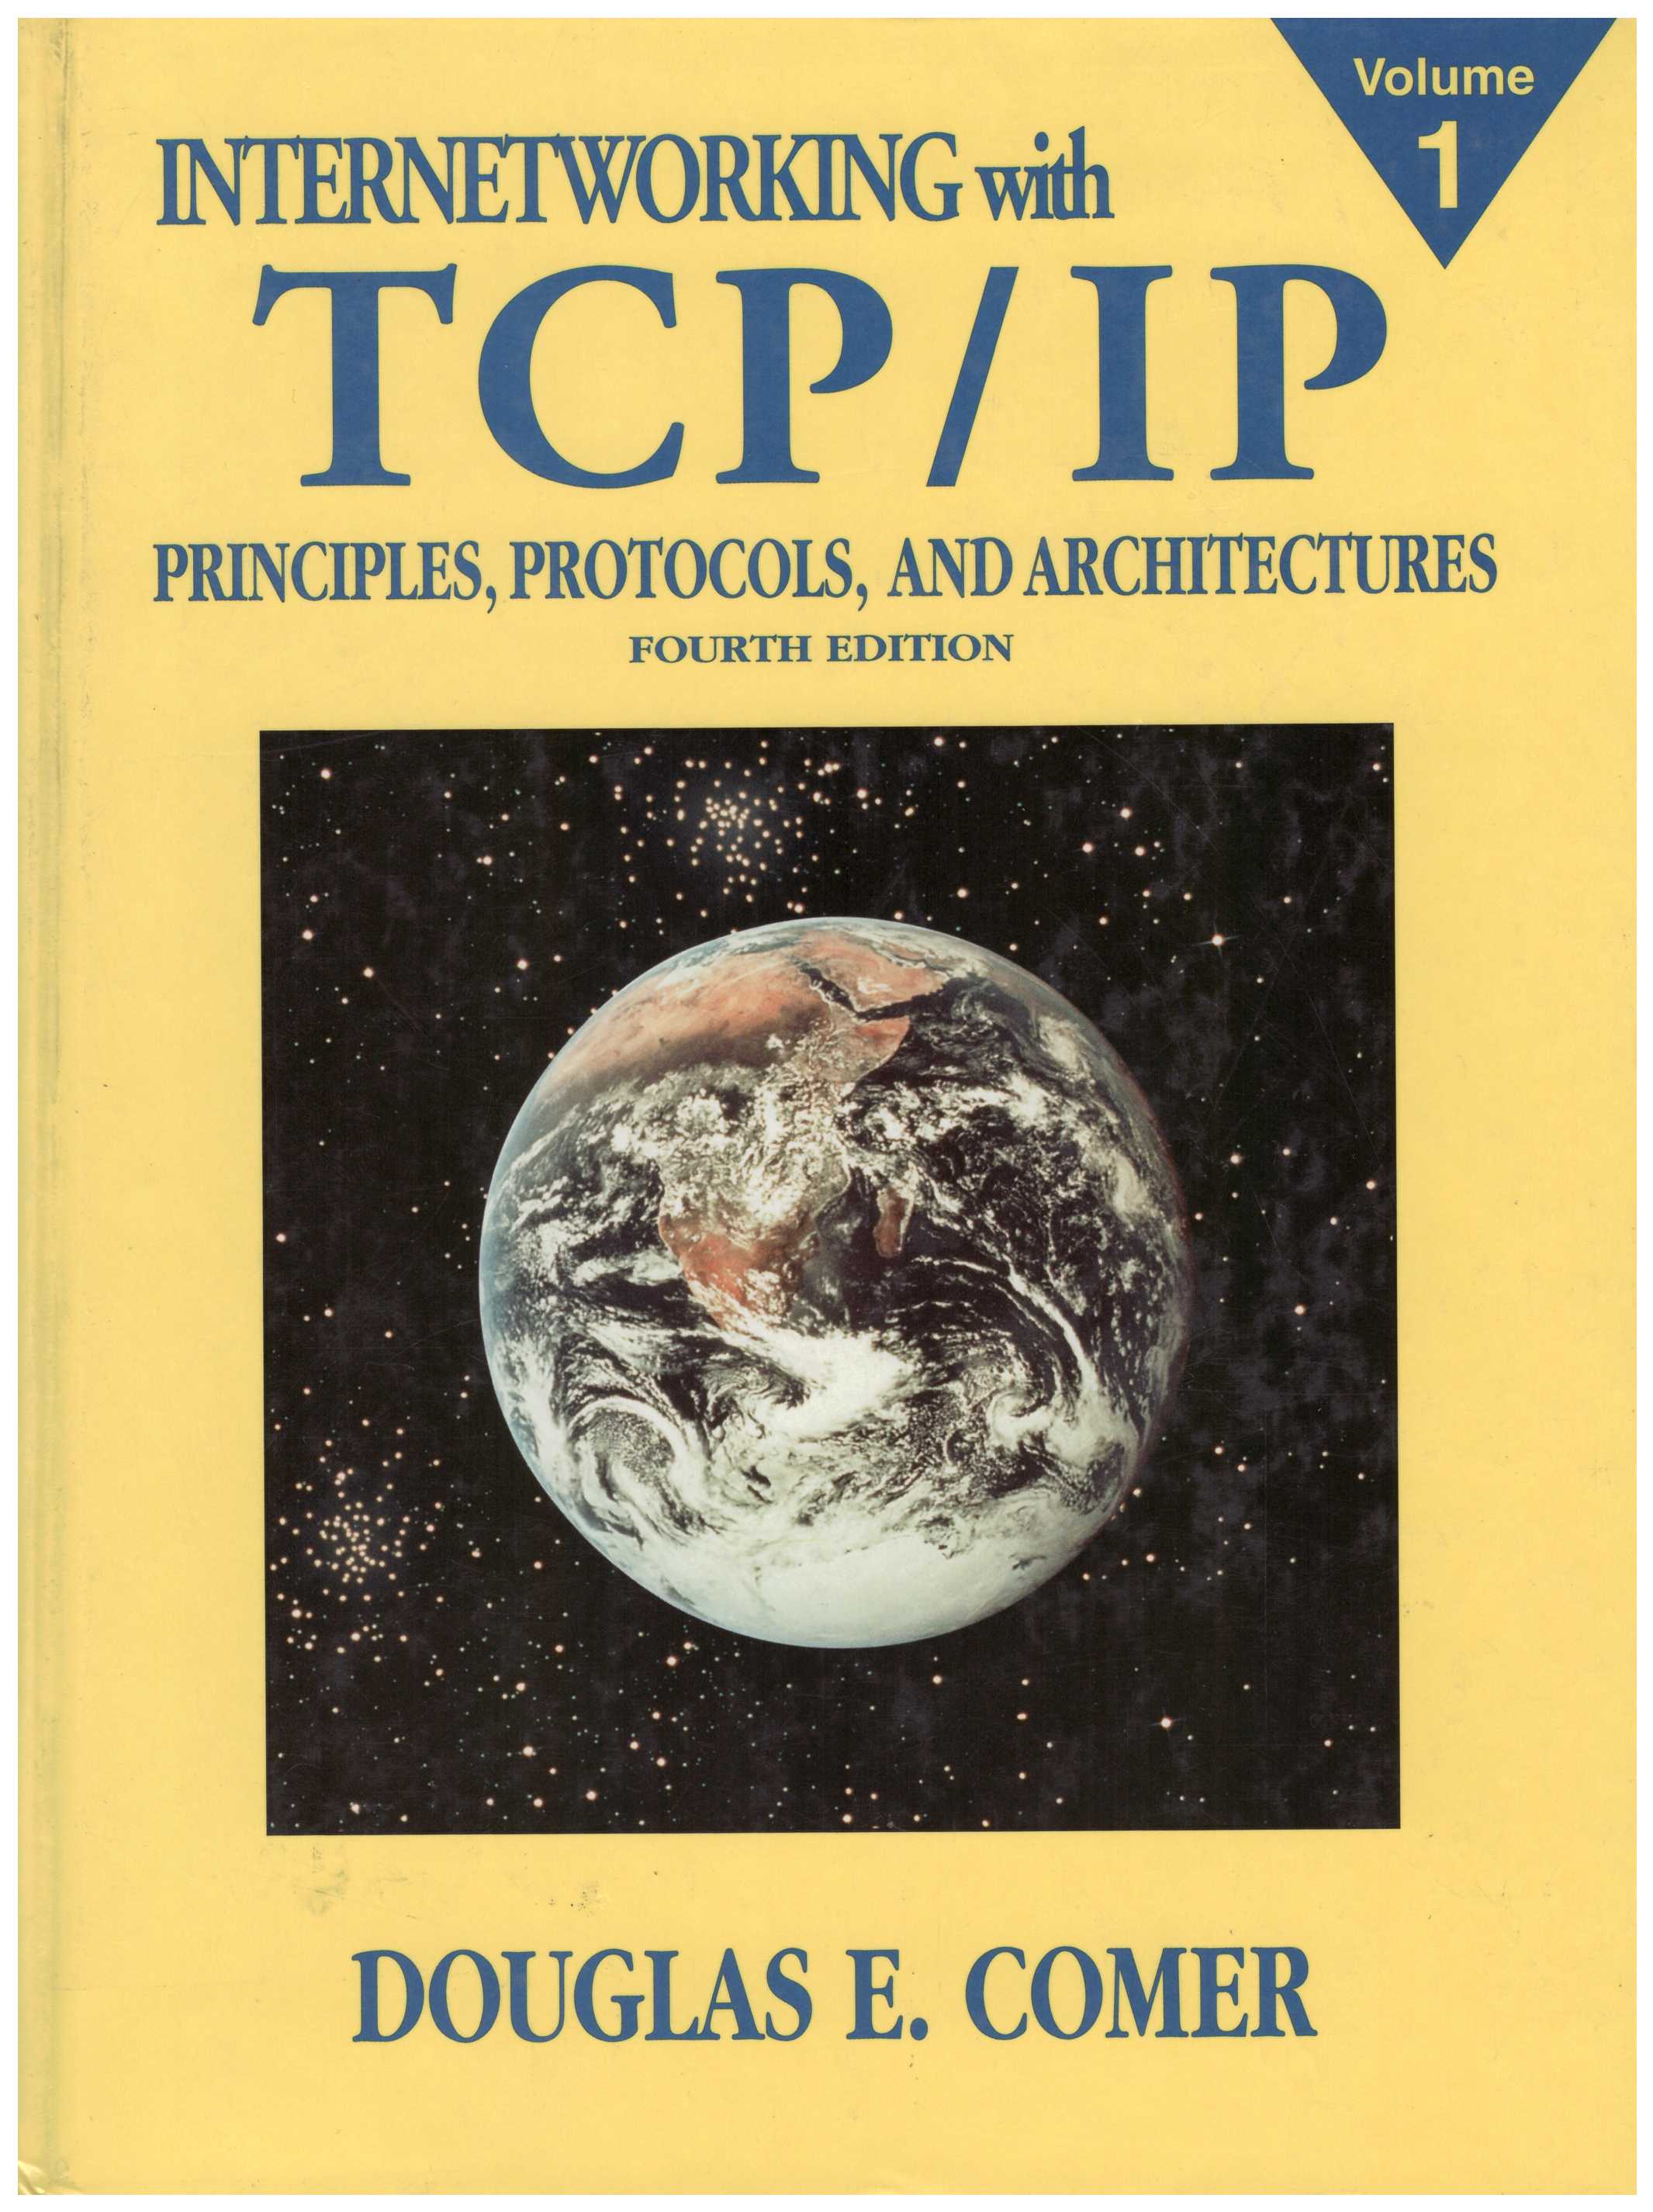 Internetworking with TCP/IP Principles, Protocols &amp Architecture(4/e,2000)